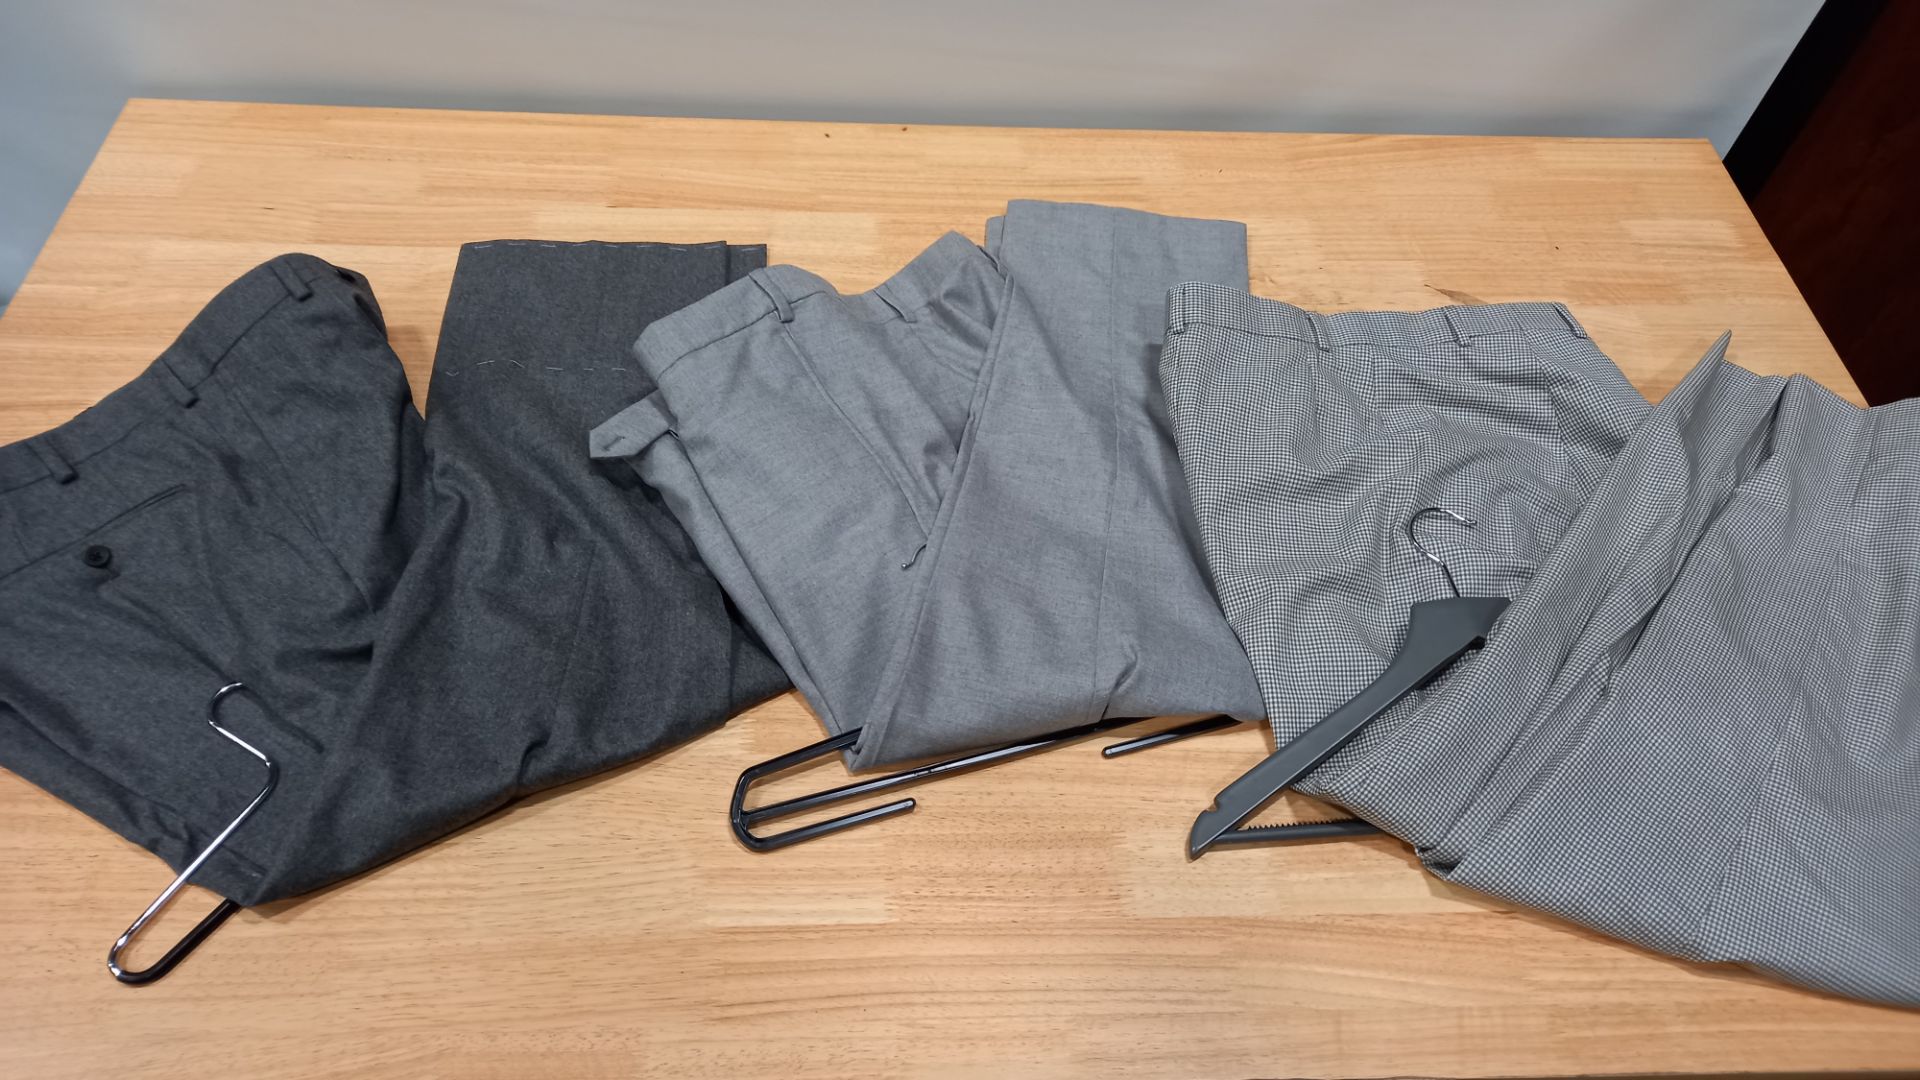 26 X PAIRS OF BRAND NEW LUTWYCHE TAILORED GREY TROUSERS IN VARIOUS SIZES AND SYLES (NOT FULY